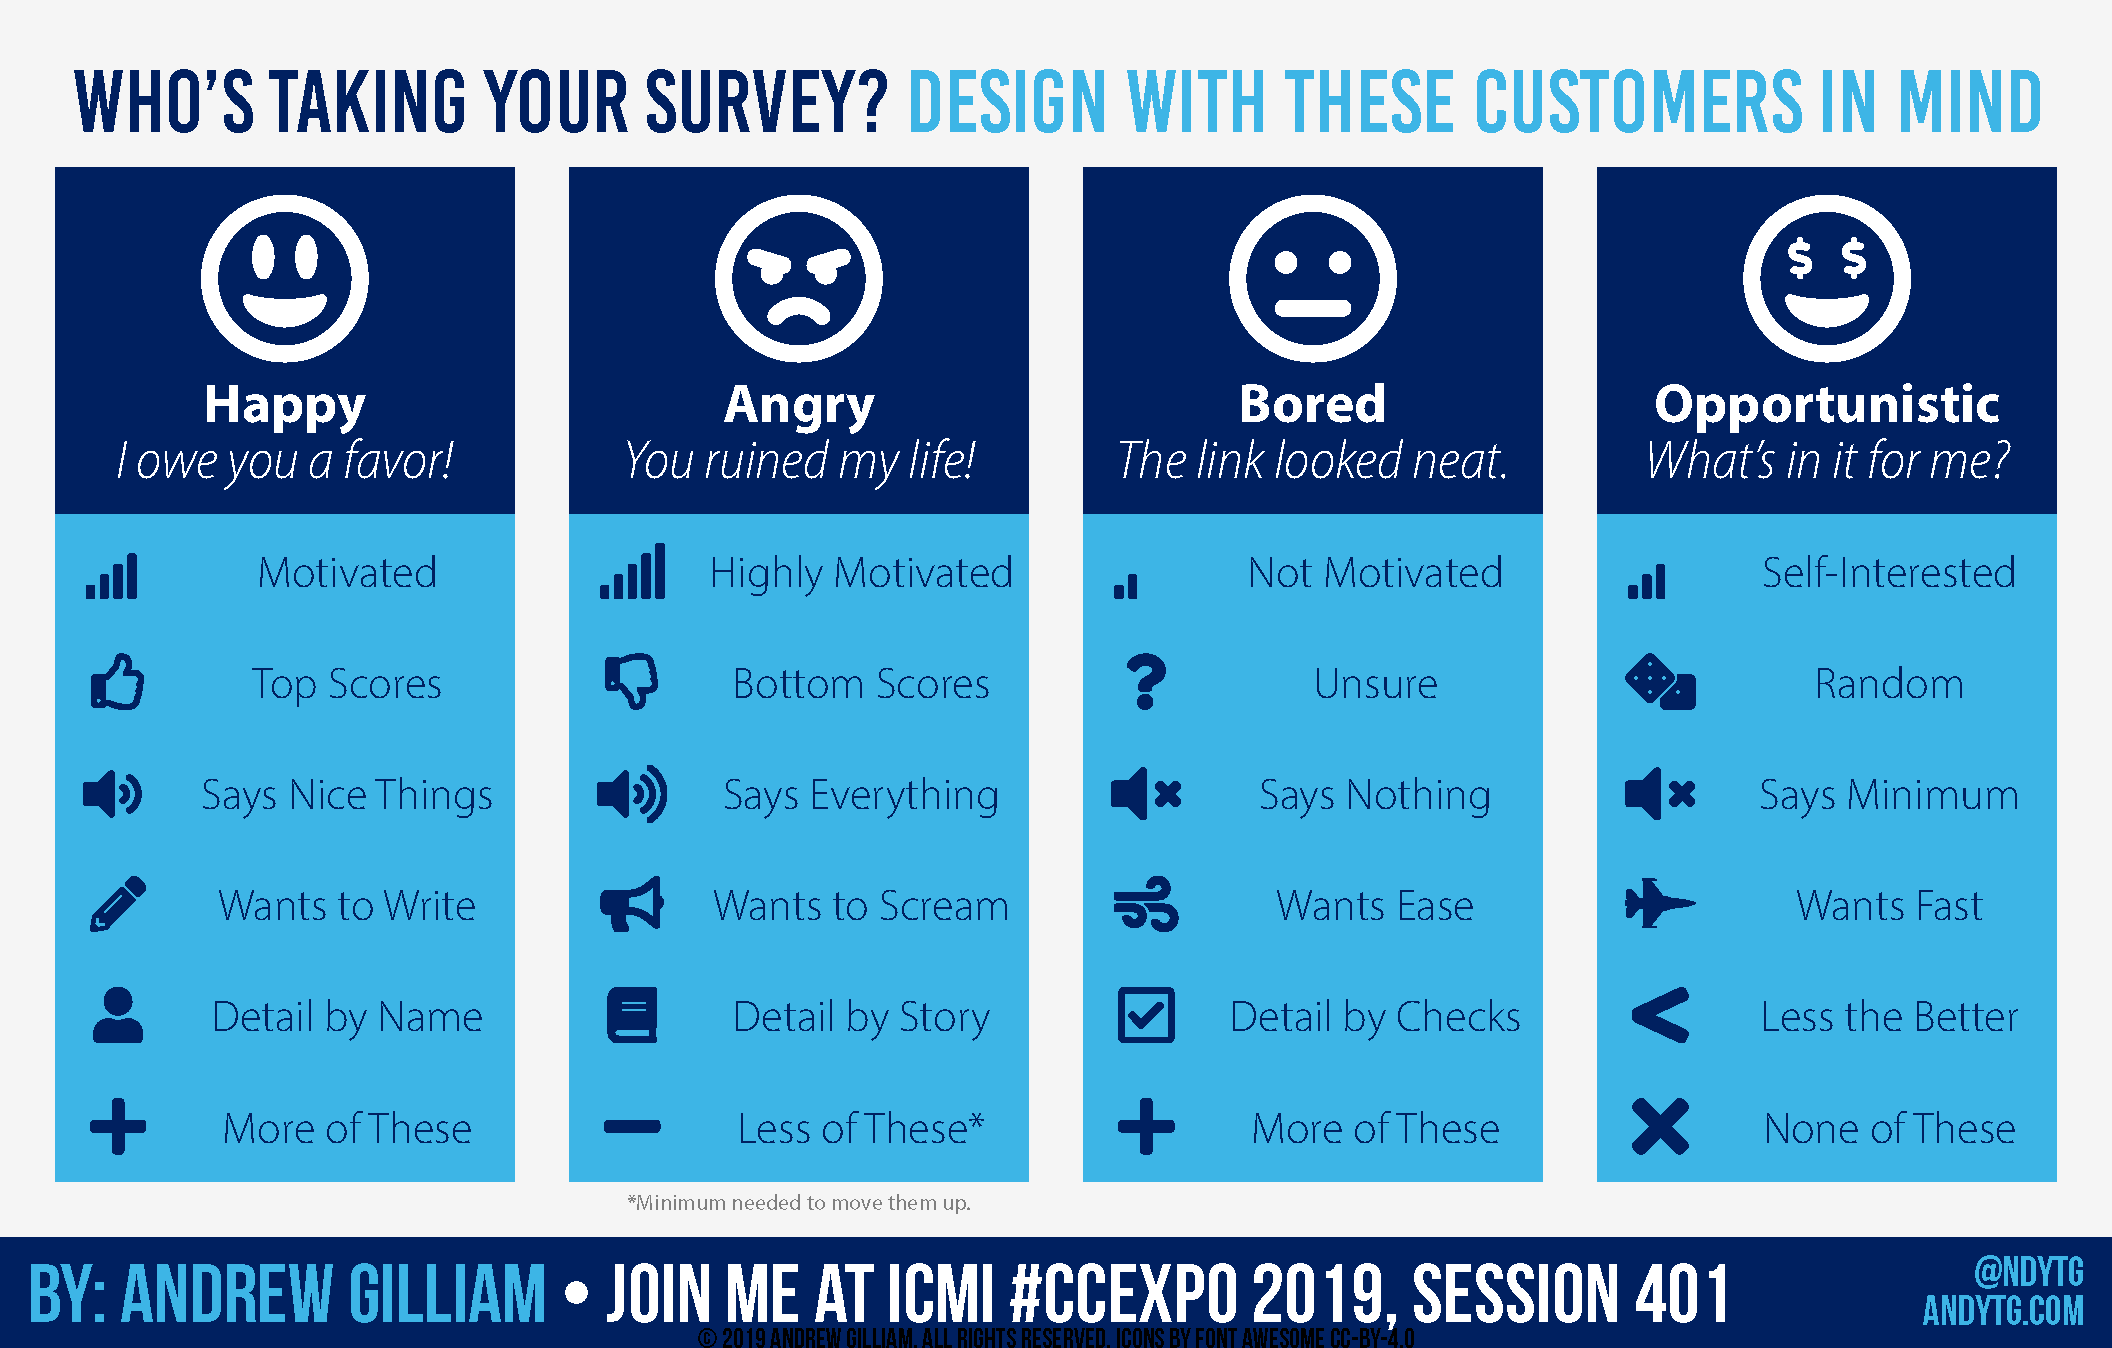 Who's Taking Your Survey: Design With These Customers In Mind